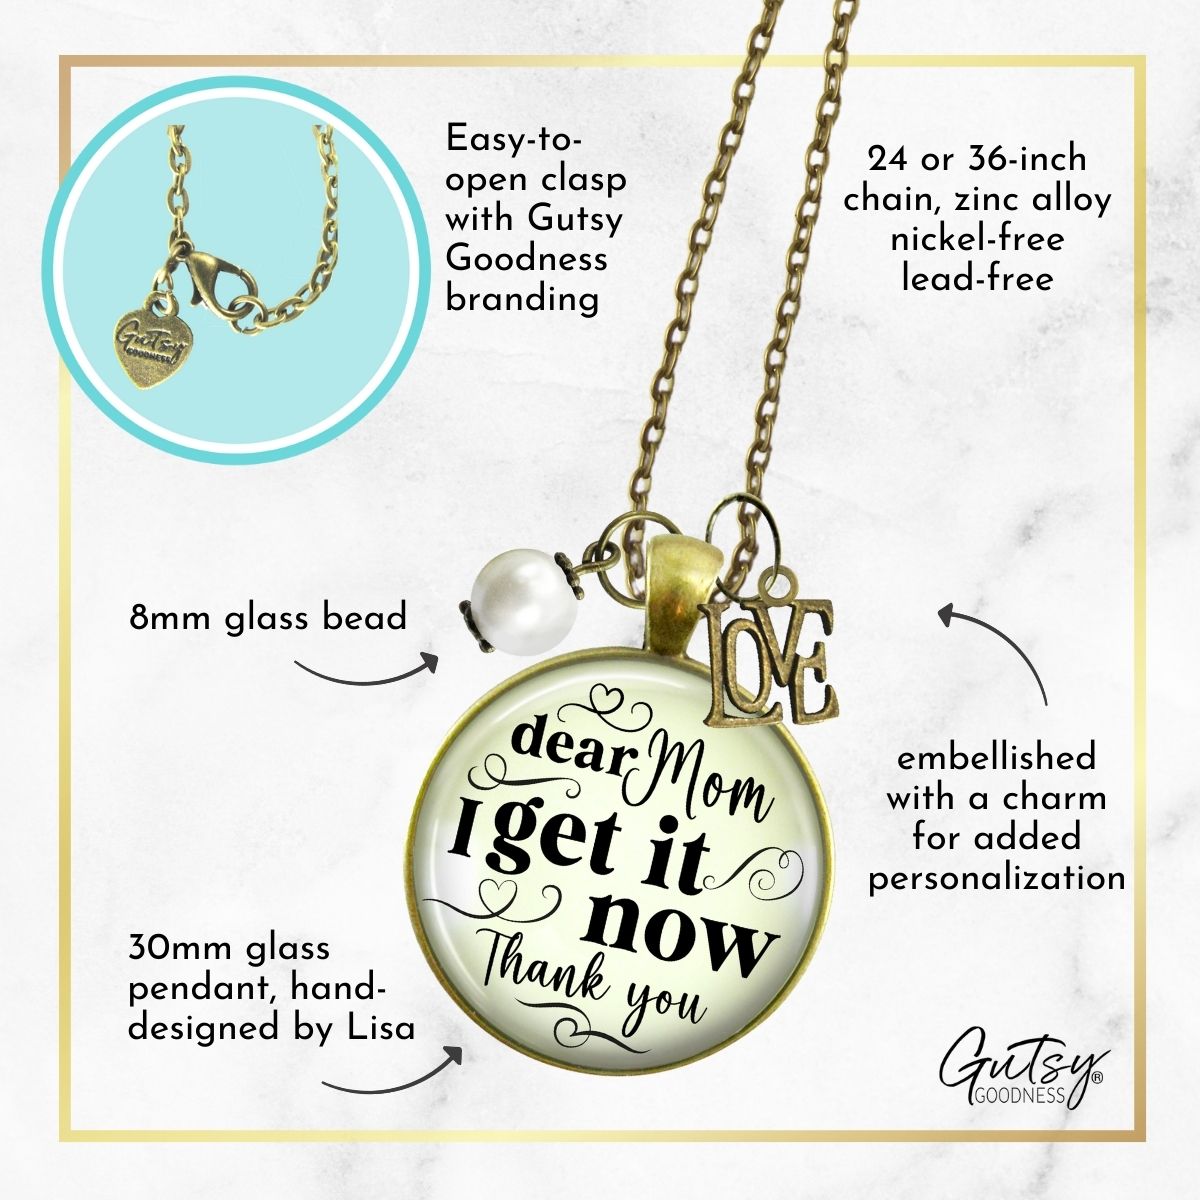 Handmade Gutsy Goodness Jewelry Dear Mom I Get It Now Necklace Gift From Adult Daughter Love You Theme Boho Jewelry & Message Card